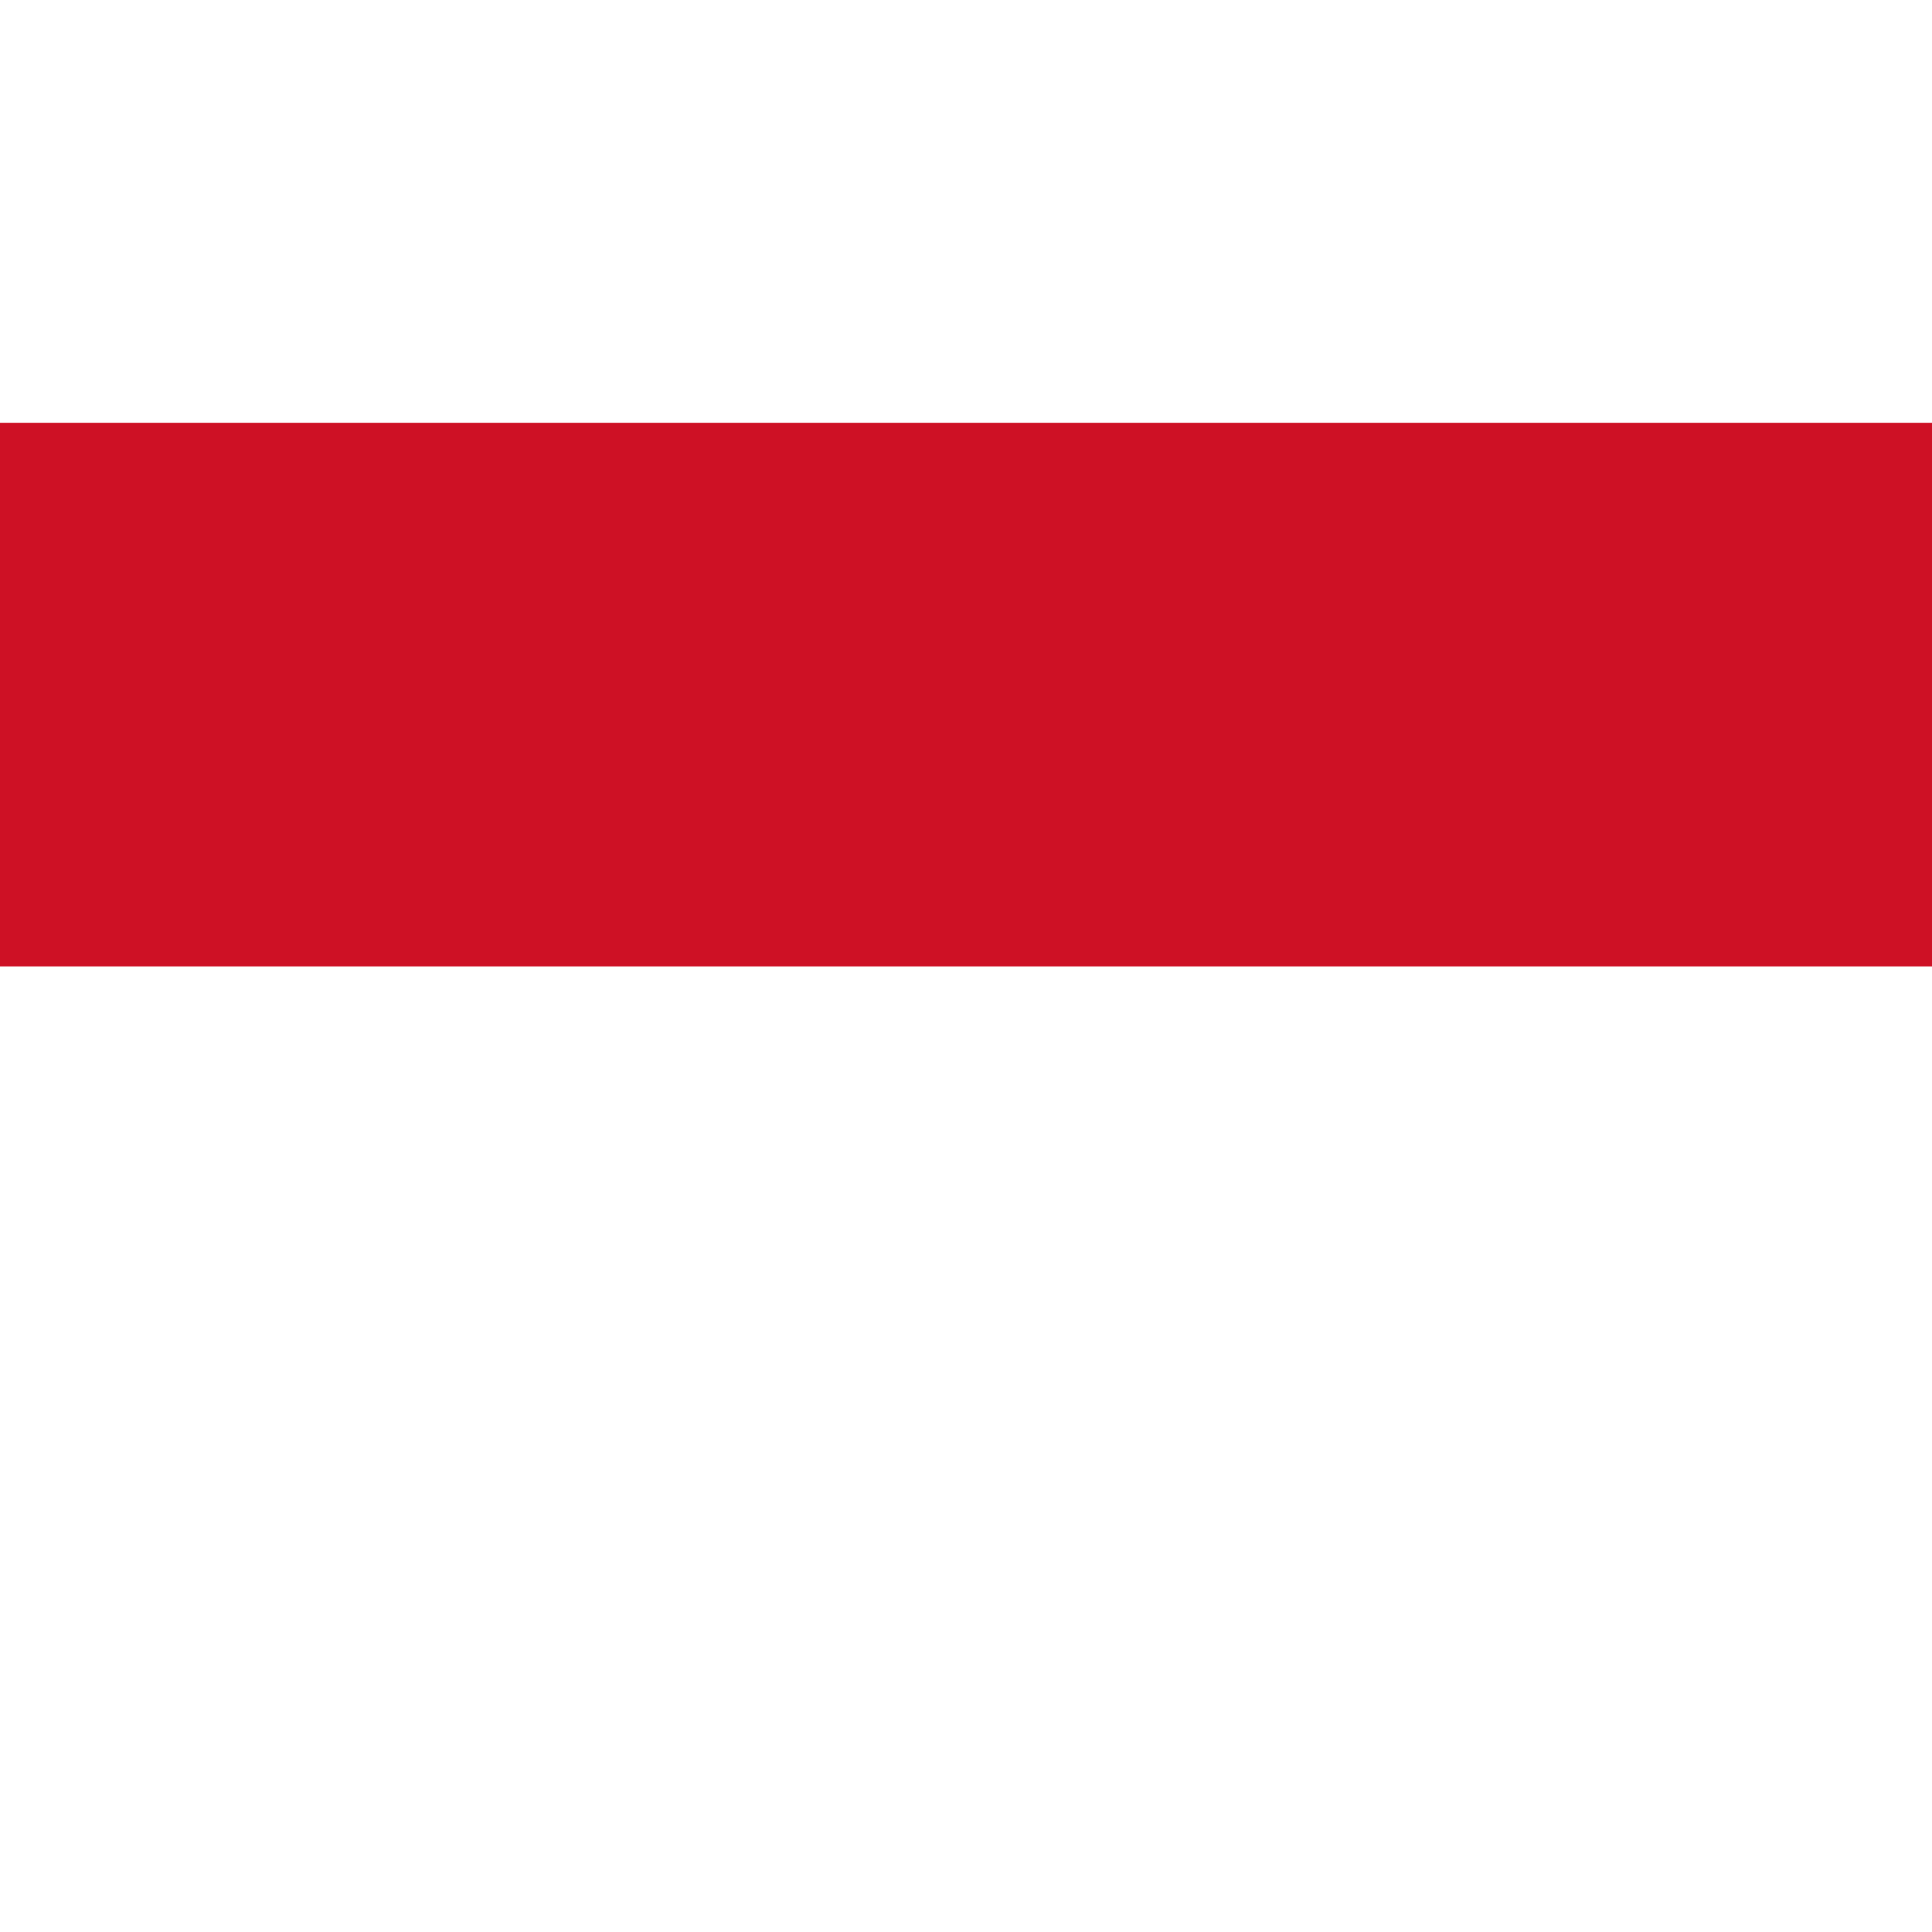 The Indonesian flag is made up of two equal horizontal bands, red on the top half and white on the bottom.